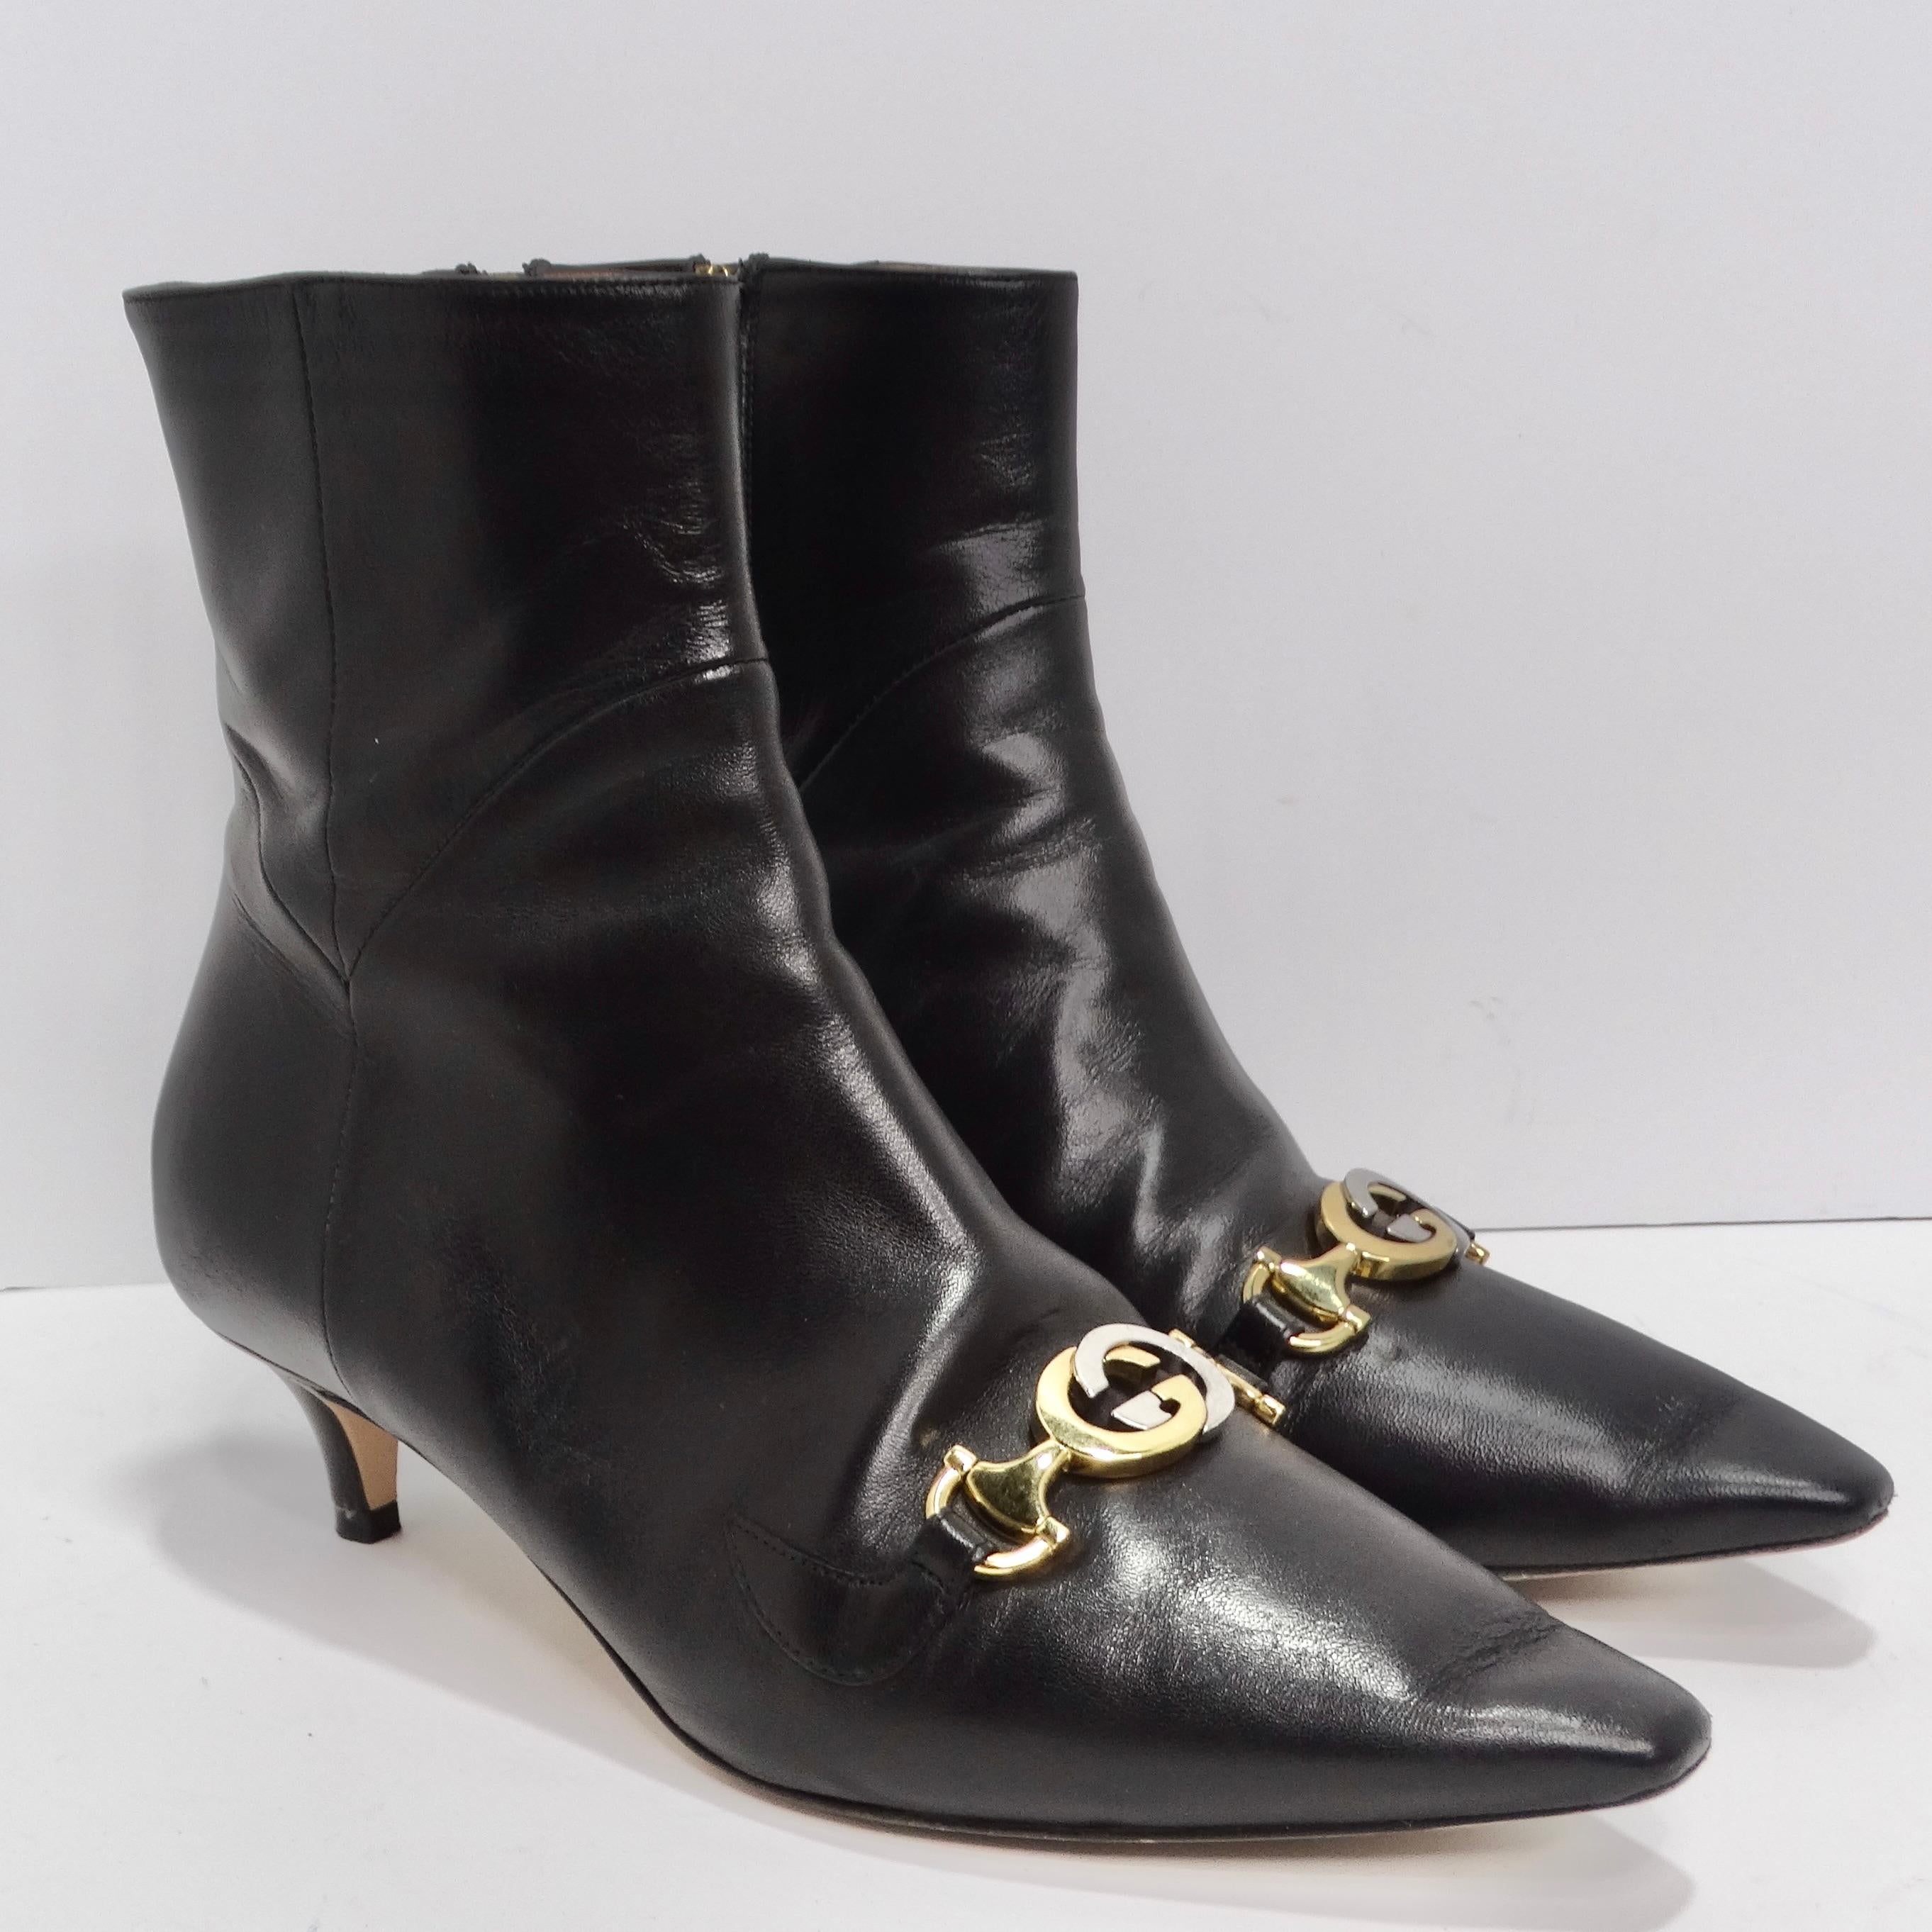 Gucci Leather Zumi Kitten Heel Ankle Boots 4